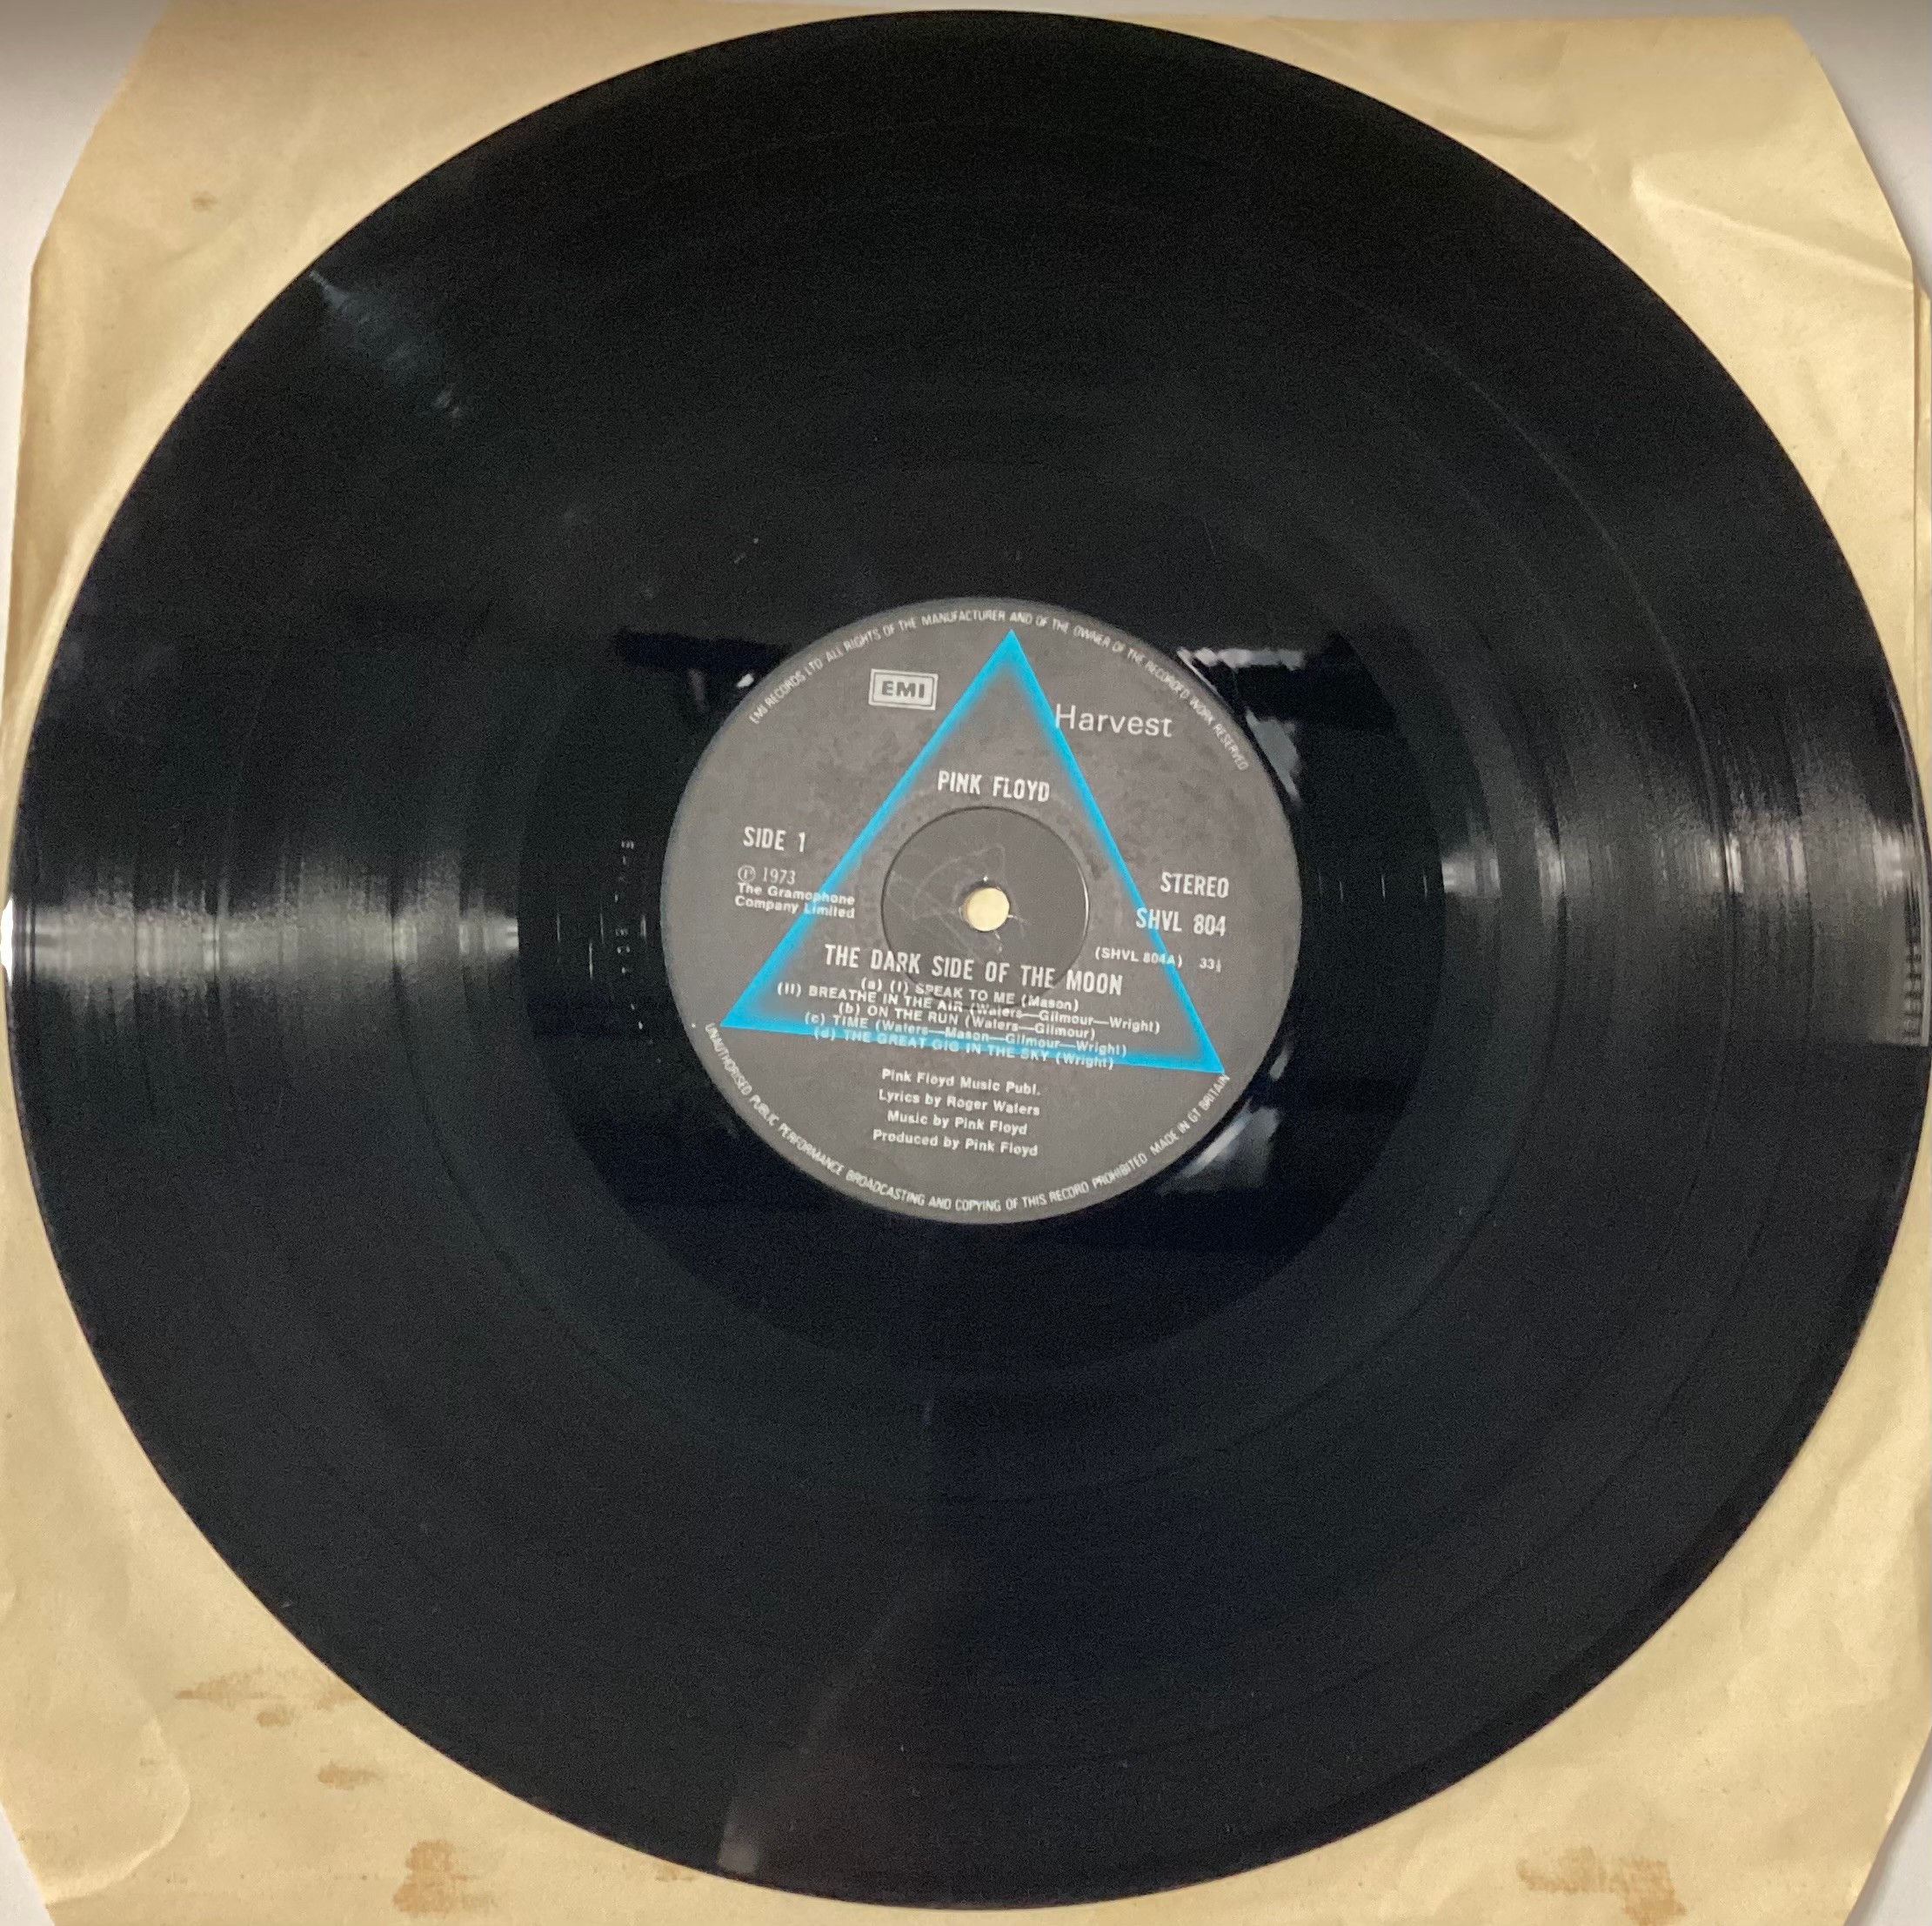 PINK FLOYD ‘DARK SIDE OF THE MOON’ VINYL LP RECORD. Found here on Harvest Records SHVL 804 from - Image 4 of 5